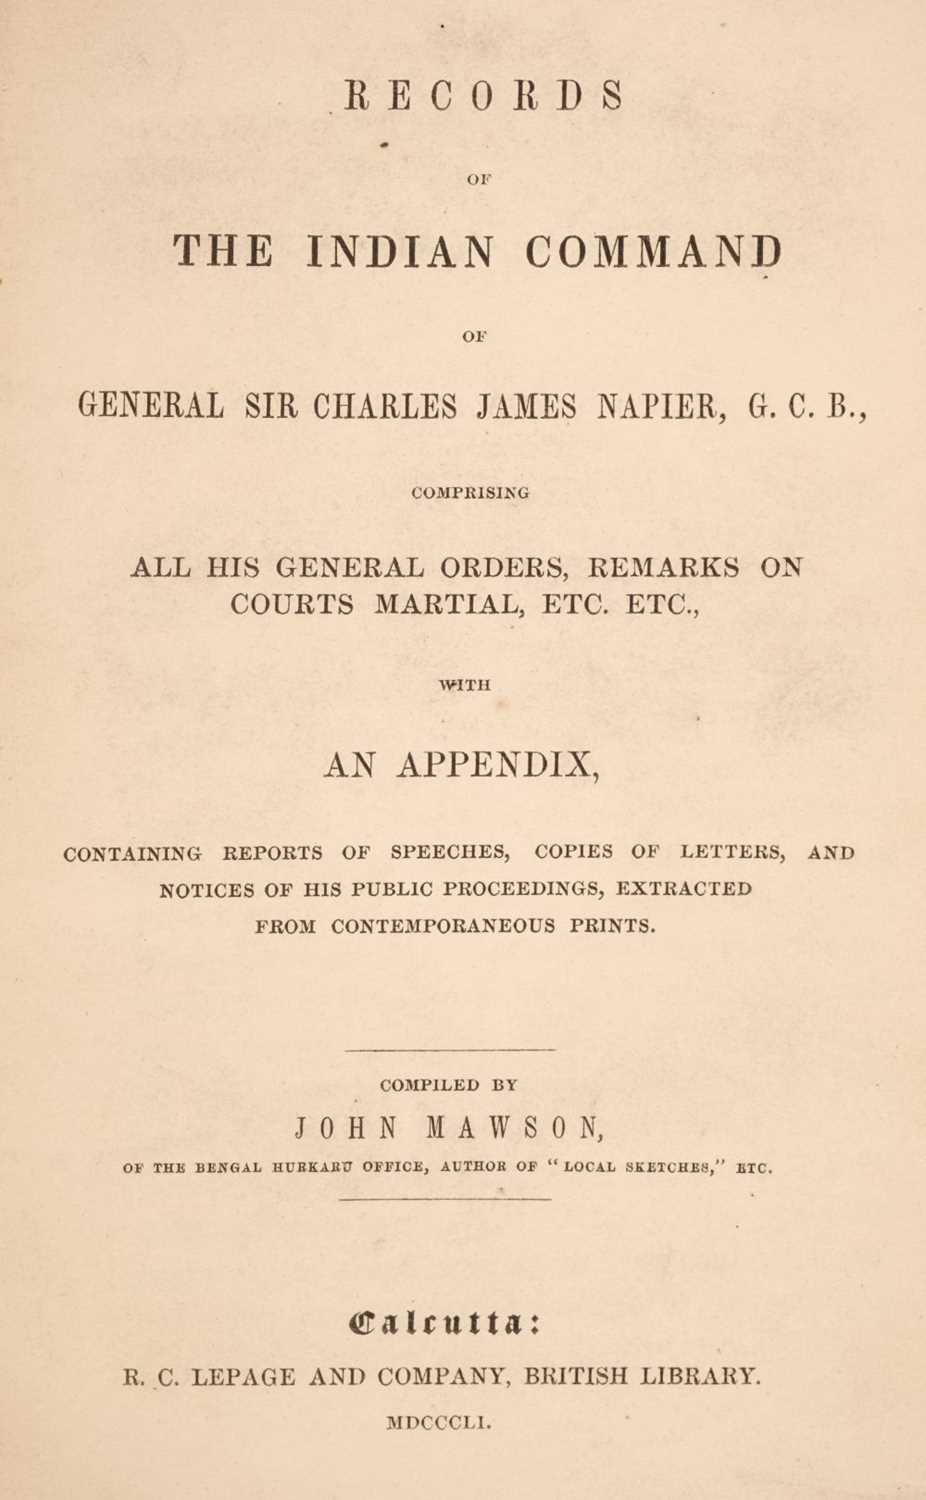 Lot 54 - Mawson (John). Records of the Indian Command of General Sir Charles James Napier, G.C.B.